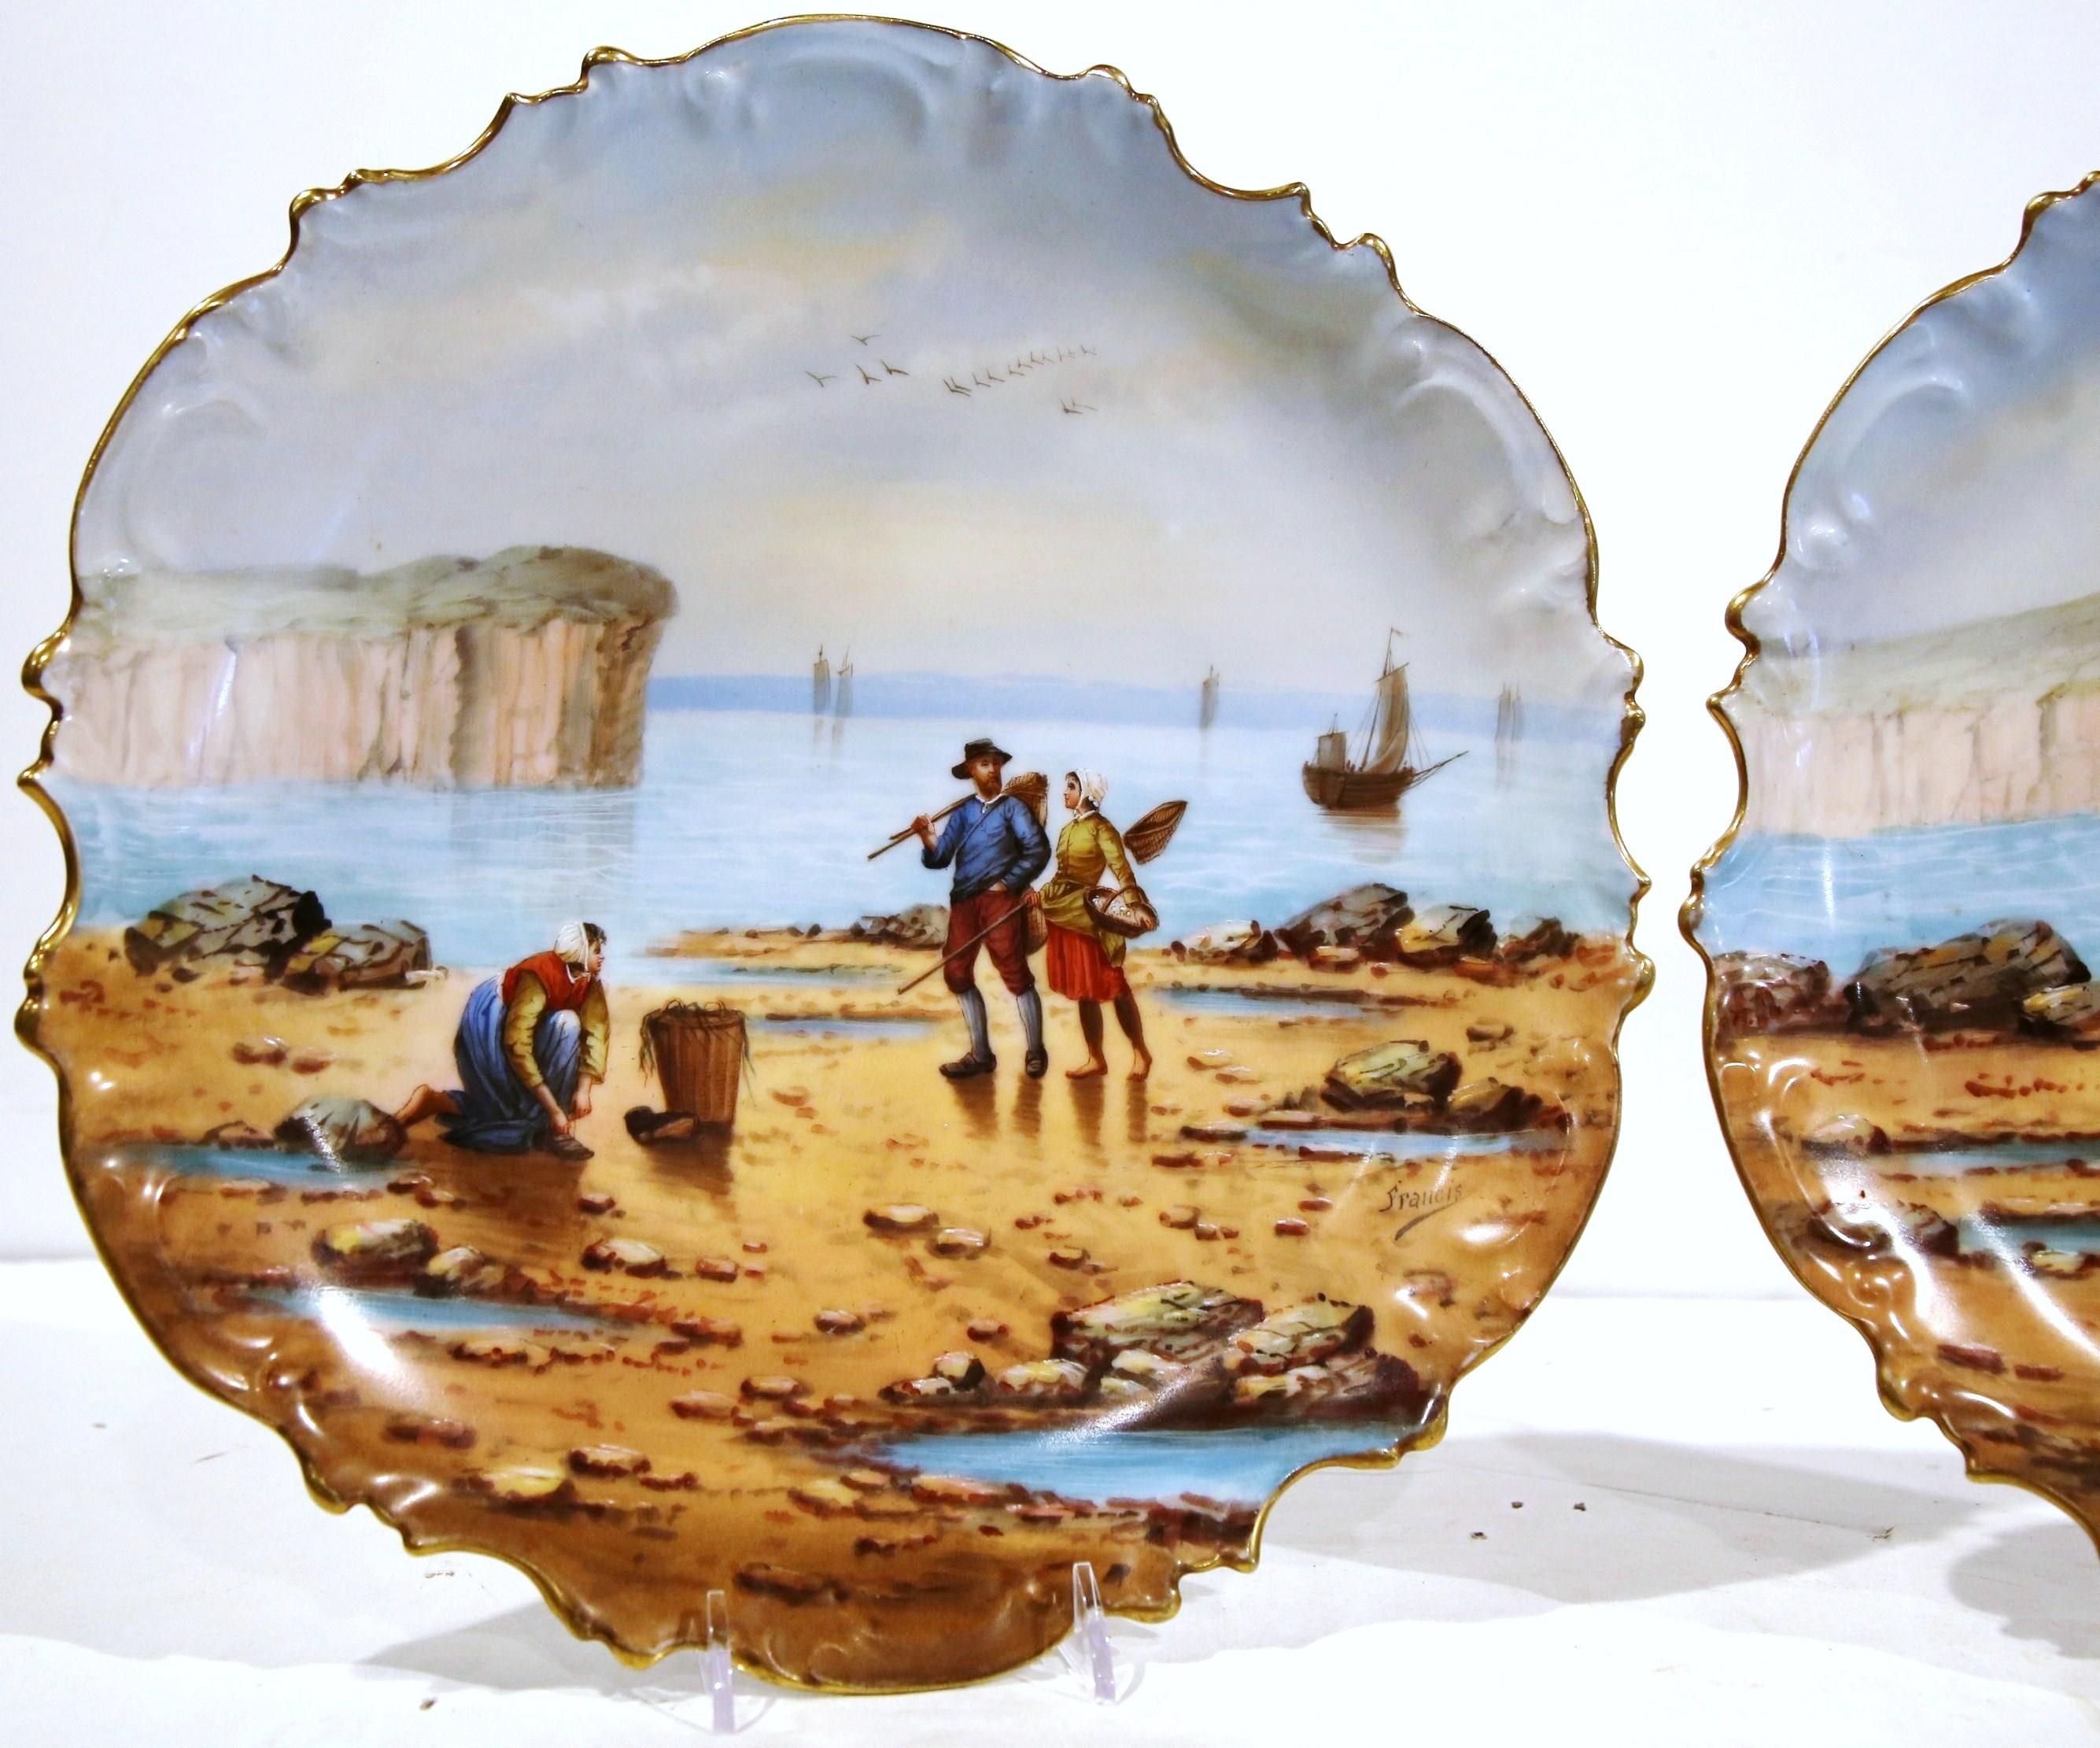 These elegant decorative plates were crafted in Paris, France, circa 1870. The hand painted platters with scalloped edges, depict two beach scenes on the coast of Brittany; each wall decor features people fishing shrimp and mussels. The antique